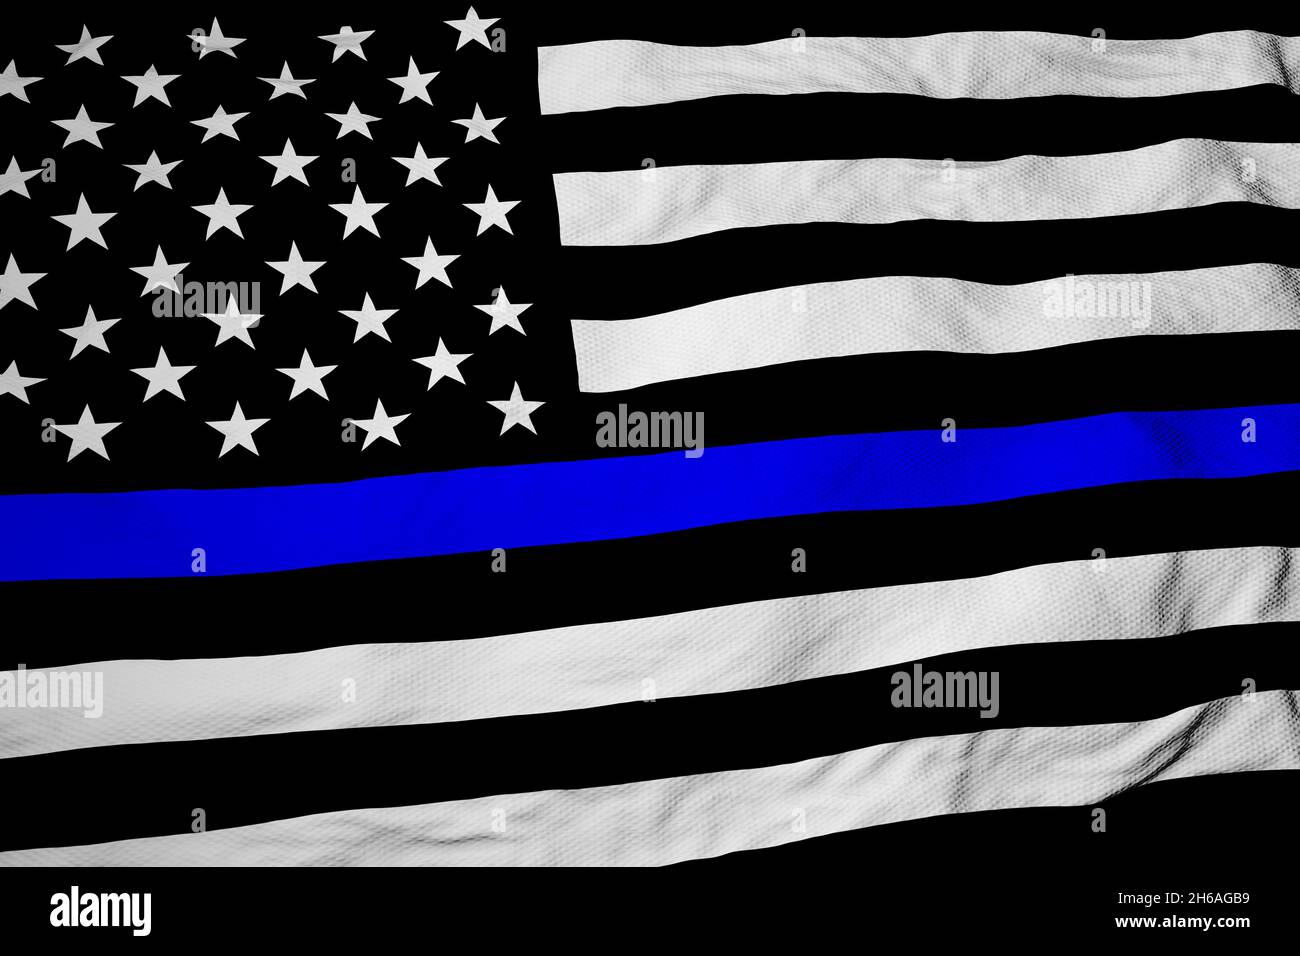 Full frame close-up on a waving black and white American flag with a blue stripe in 3D rendering. Stock Photo